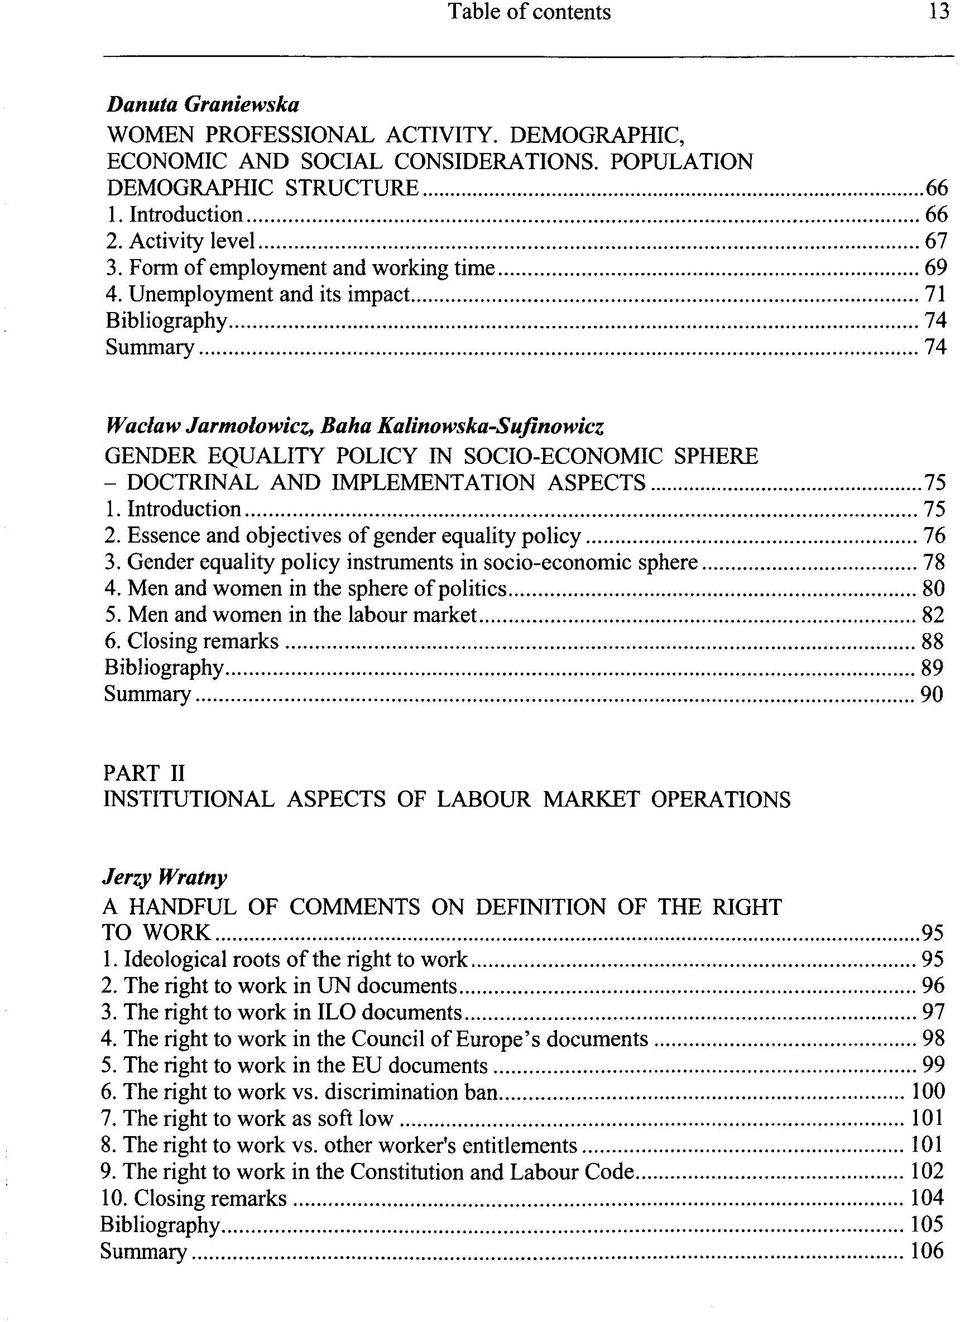 Unemployment and its impact 71 Bibliography 74 Summary 74 Waclaw Jarmolowicz, Baha Kalinowska-Sufinowicz GENDER EQUALITY POLICY IN SOCIO-ECONOMIC SPHERE - DOCTRINAL AND IMPLEMENTATION ASPECTS 75 1.